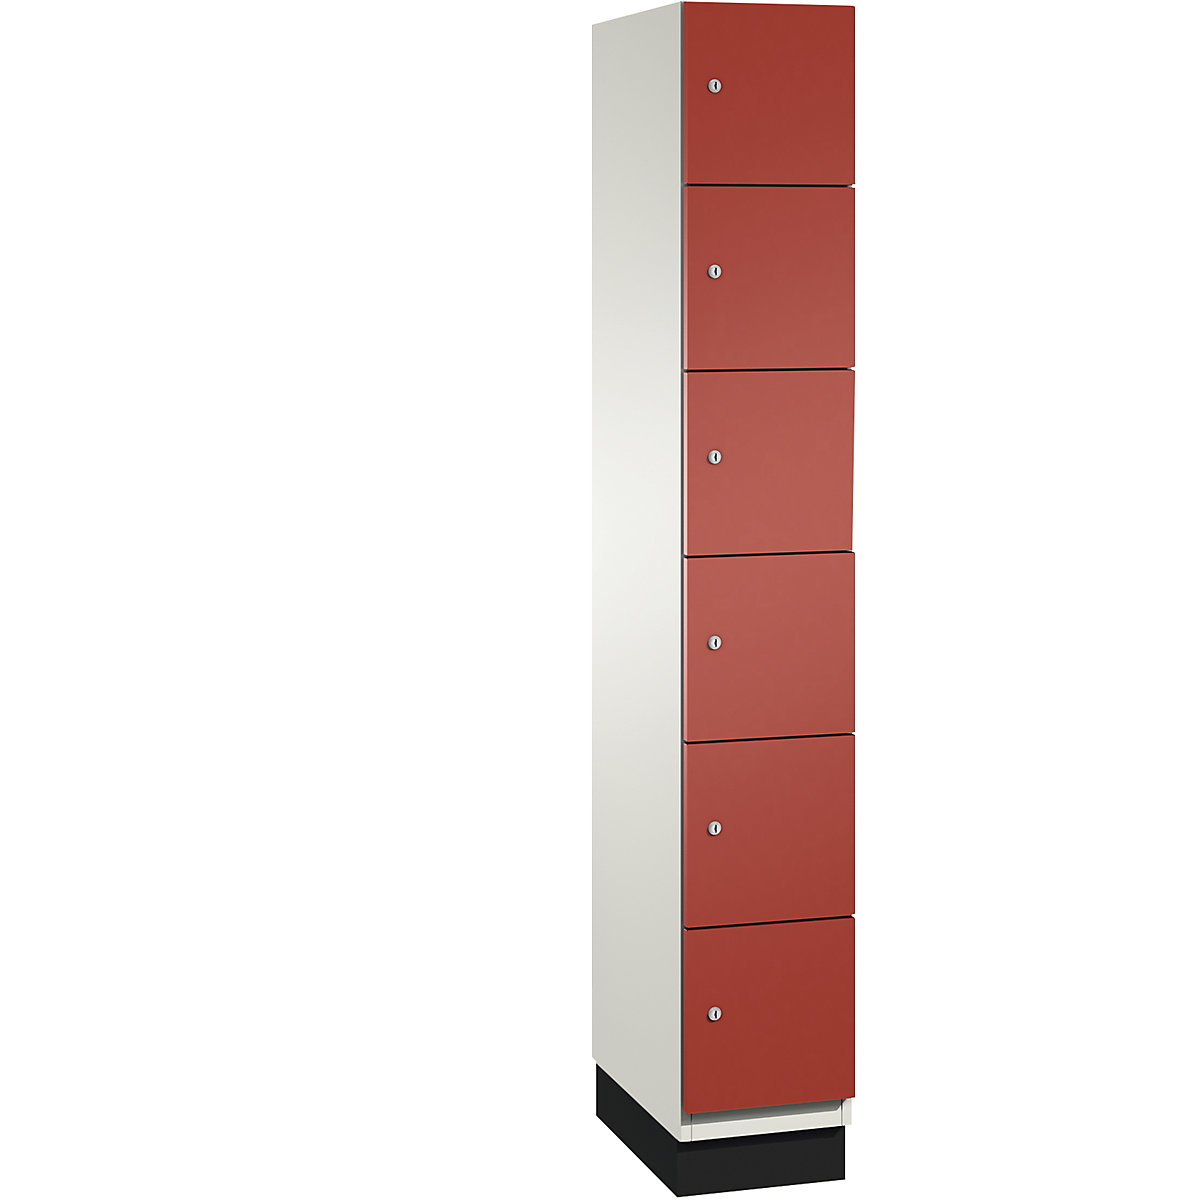 CAMBIO compartment locker with sheet steel doors – C+P, 6 compartments, width 300 mm, body pure white / door flame red-12